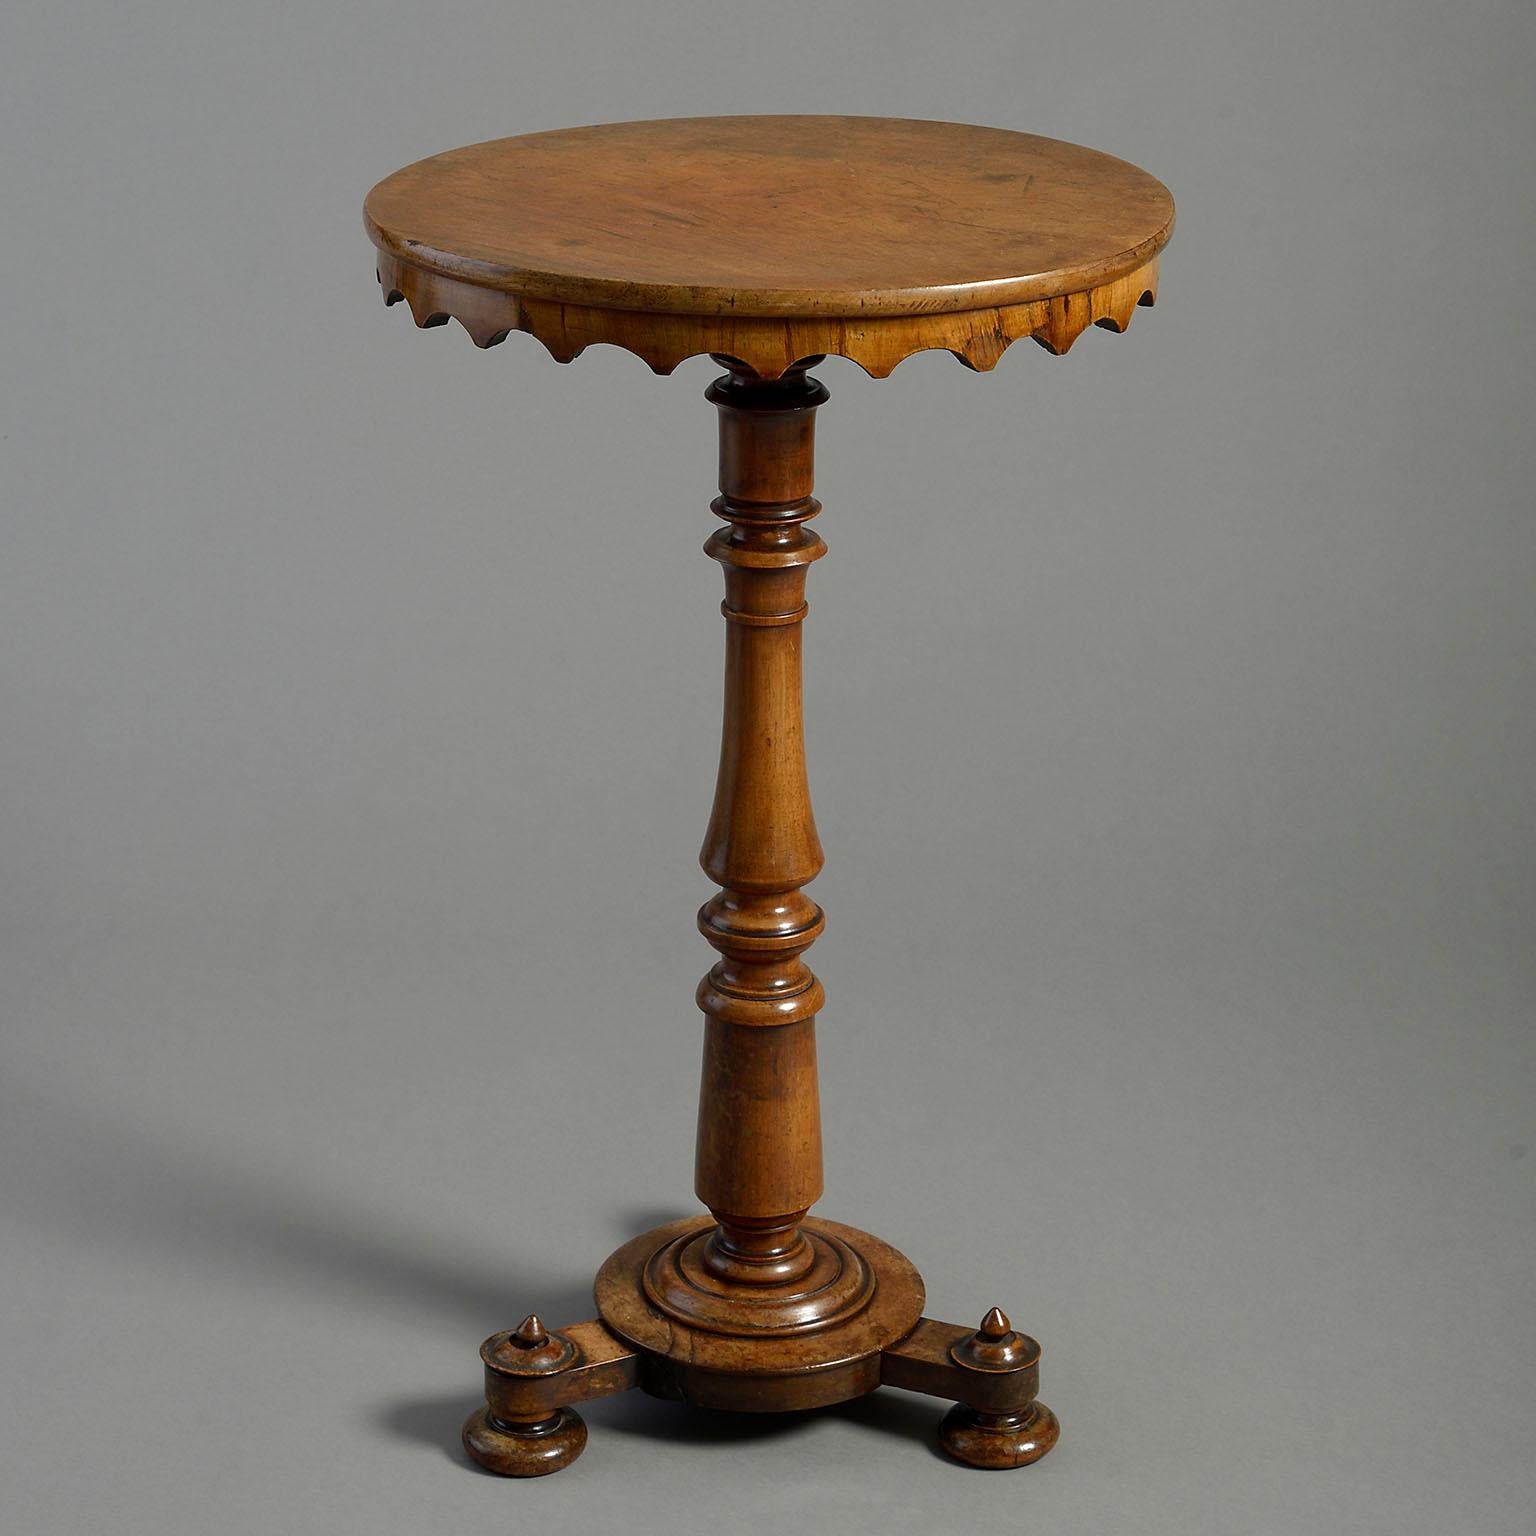 A fine mid-19th century Victorian Period walnut occasional table, the circular top with inverted scalloped apron set upon a turned stem, the base comprising a central roundel raised on three turned feet each surmounted with a finial.

This table